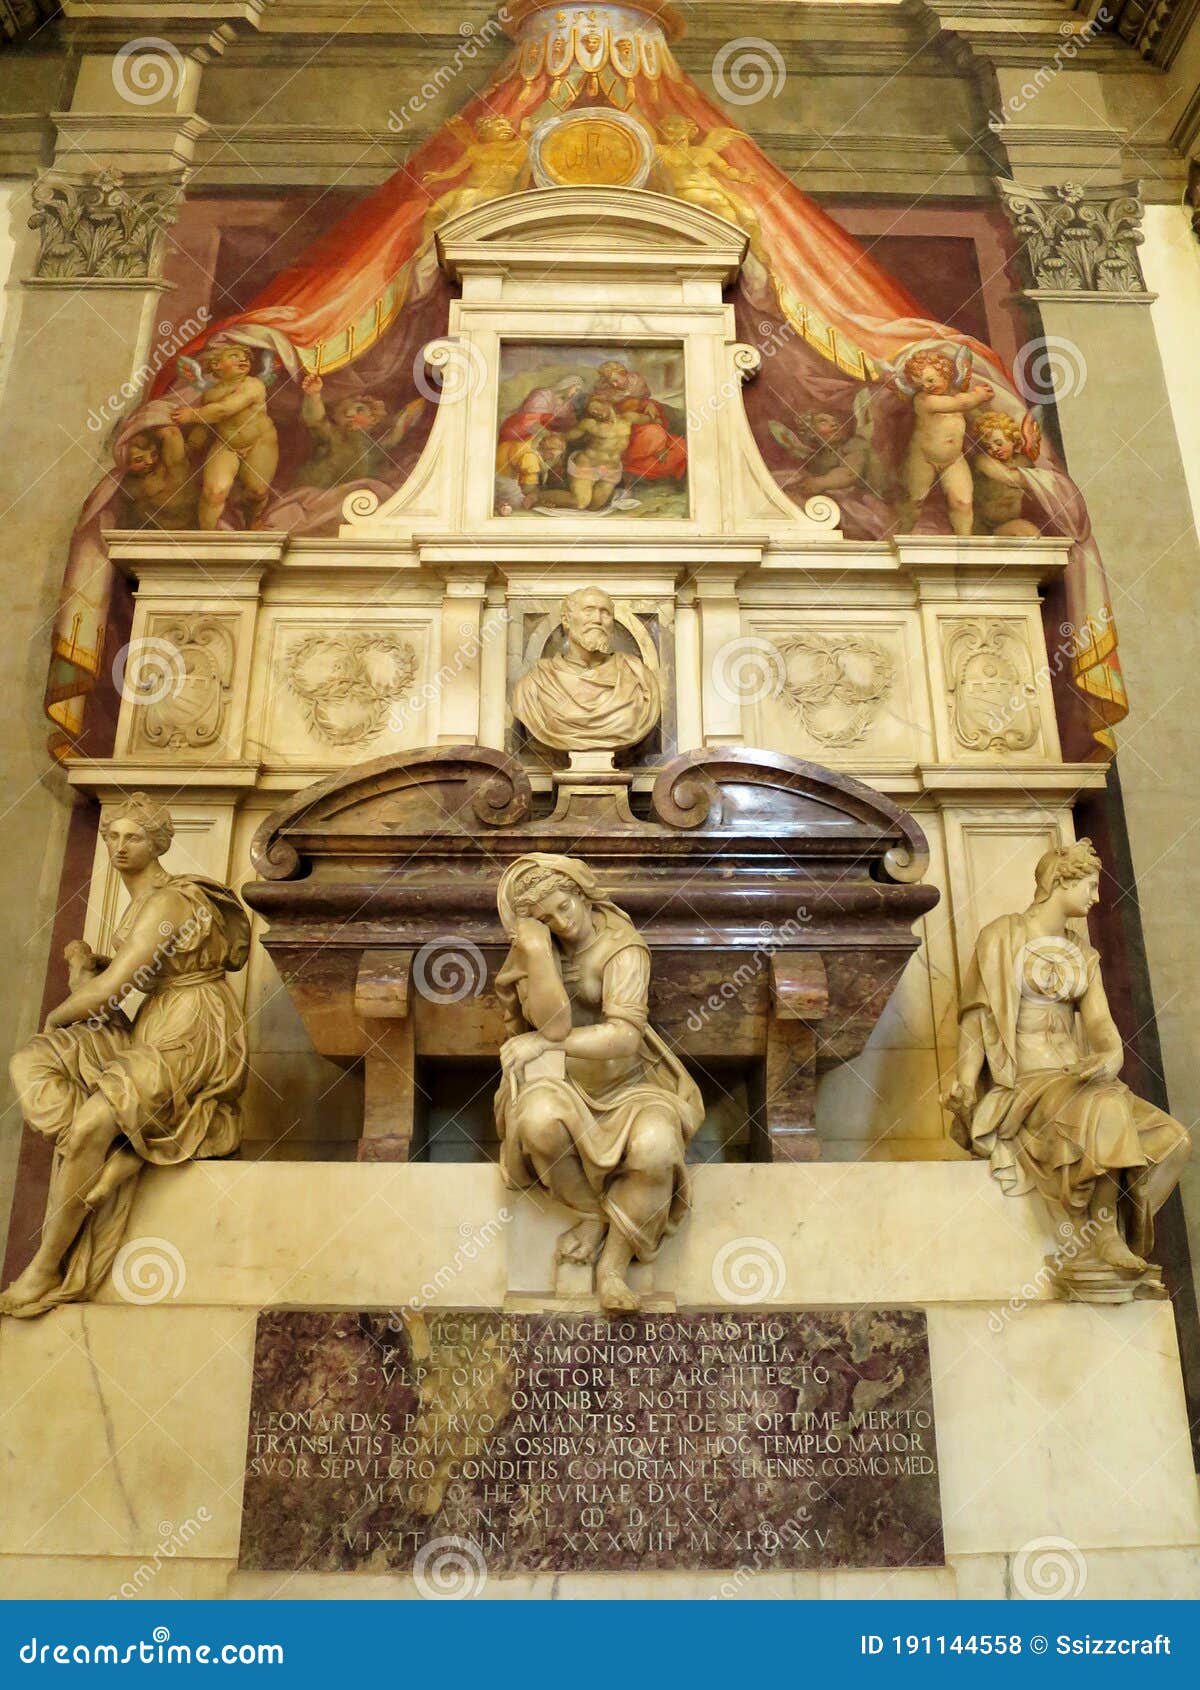 Michelangelo S Tomb Inside The Basilica Of Santa Croce In Florence